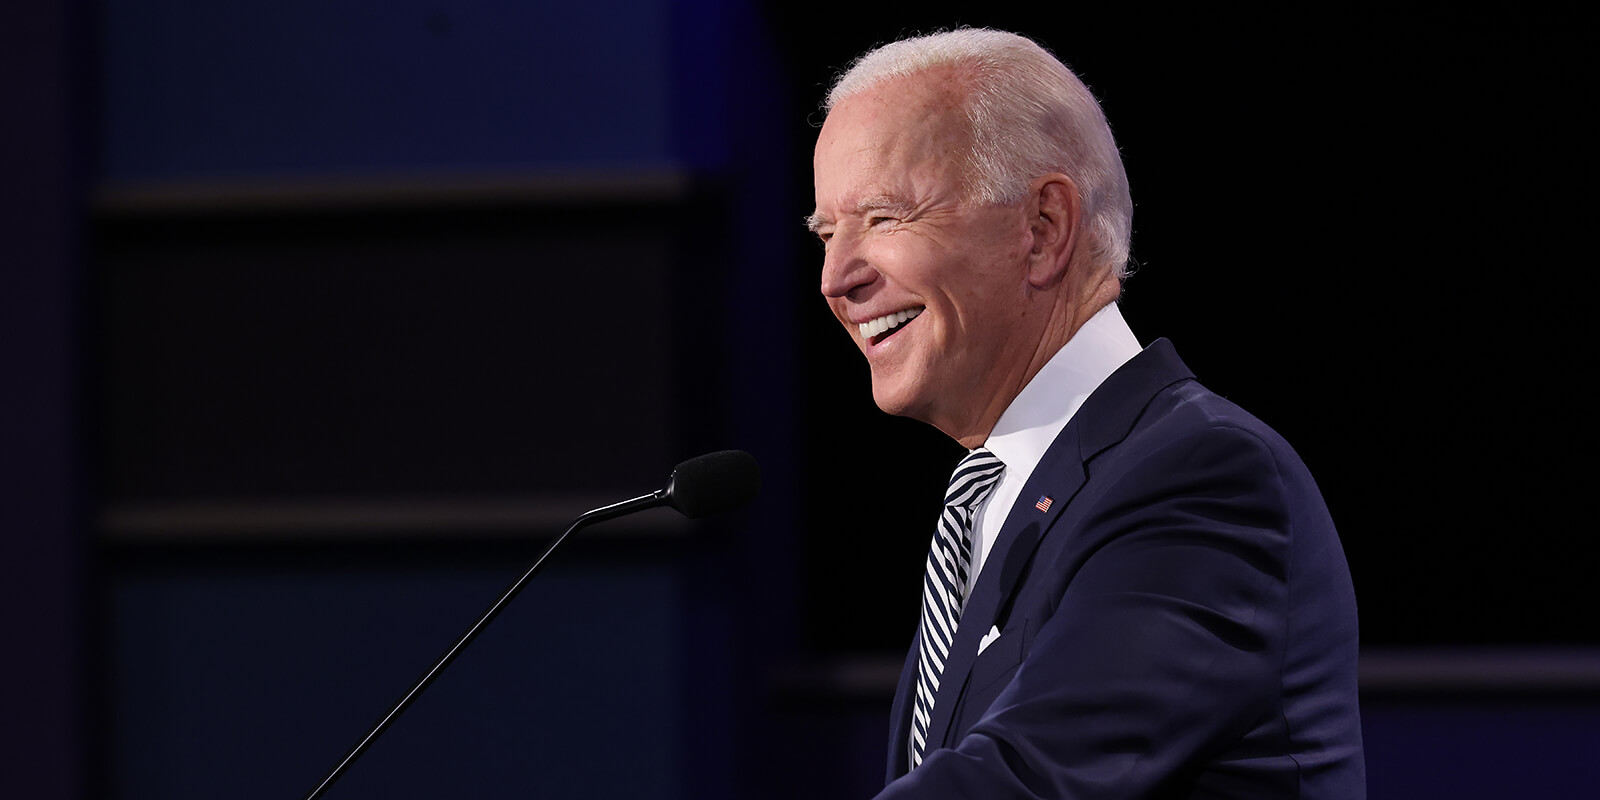 At first presidential debate, Biden shows why he’s the only choice for working families